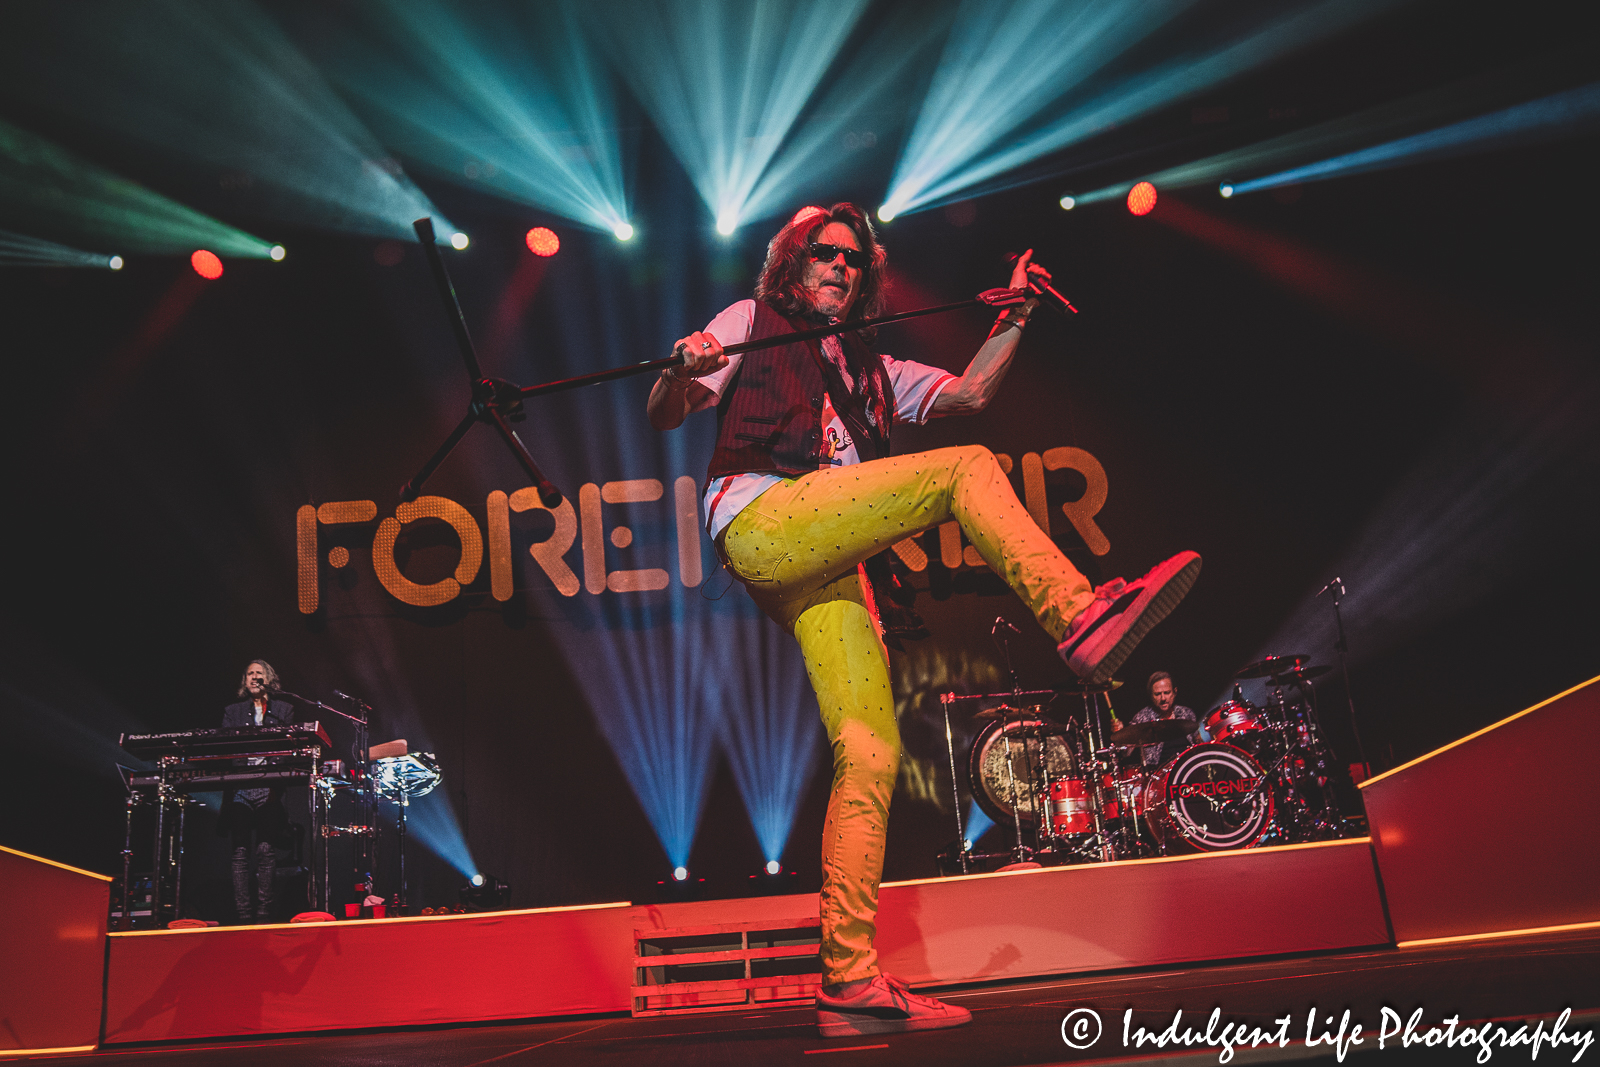 Lead singer Kelly Hansen of Foreigner performing "Double Vision" with keyboardist Michael Bluestein and drummer Chris Frazier at Landon Arena inside of Stormont Vail Events Center in Topeka, KS on May 2, 2023.